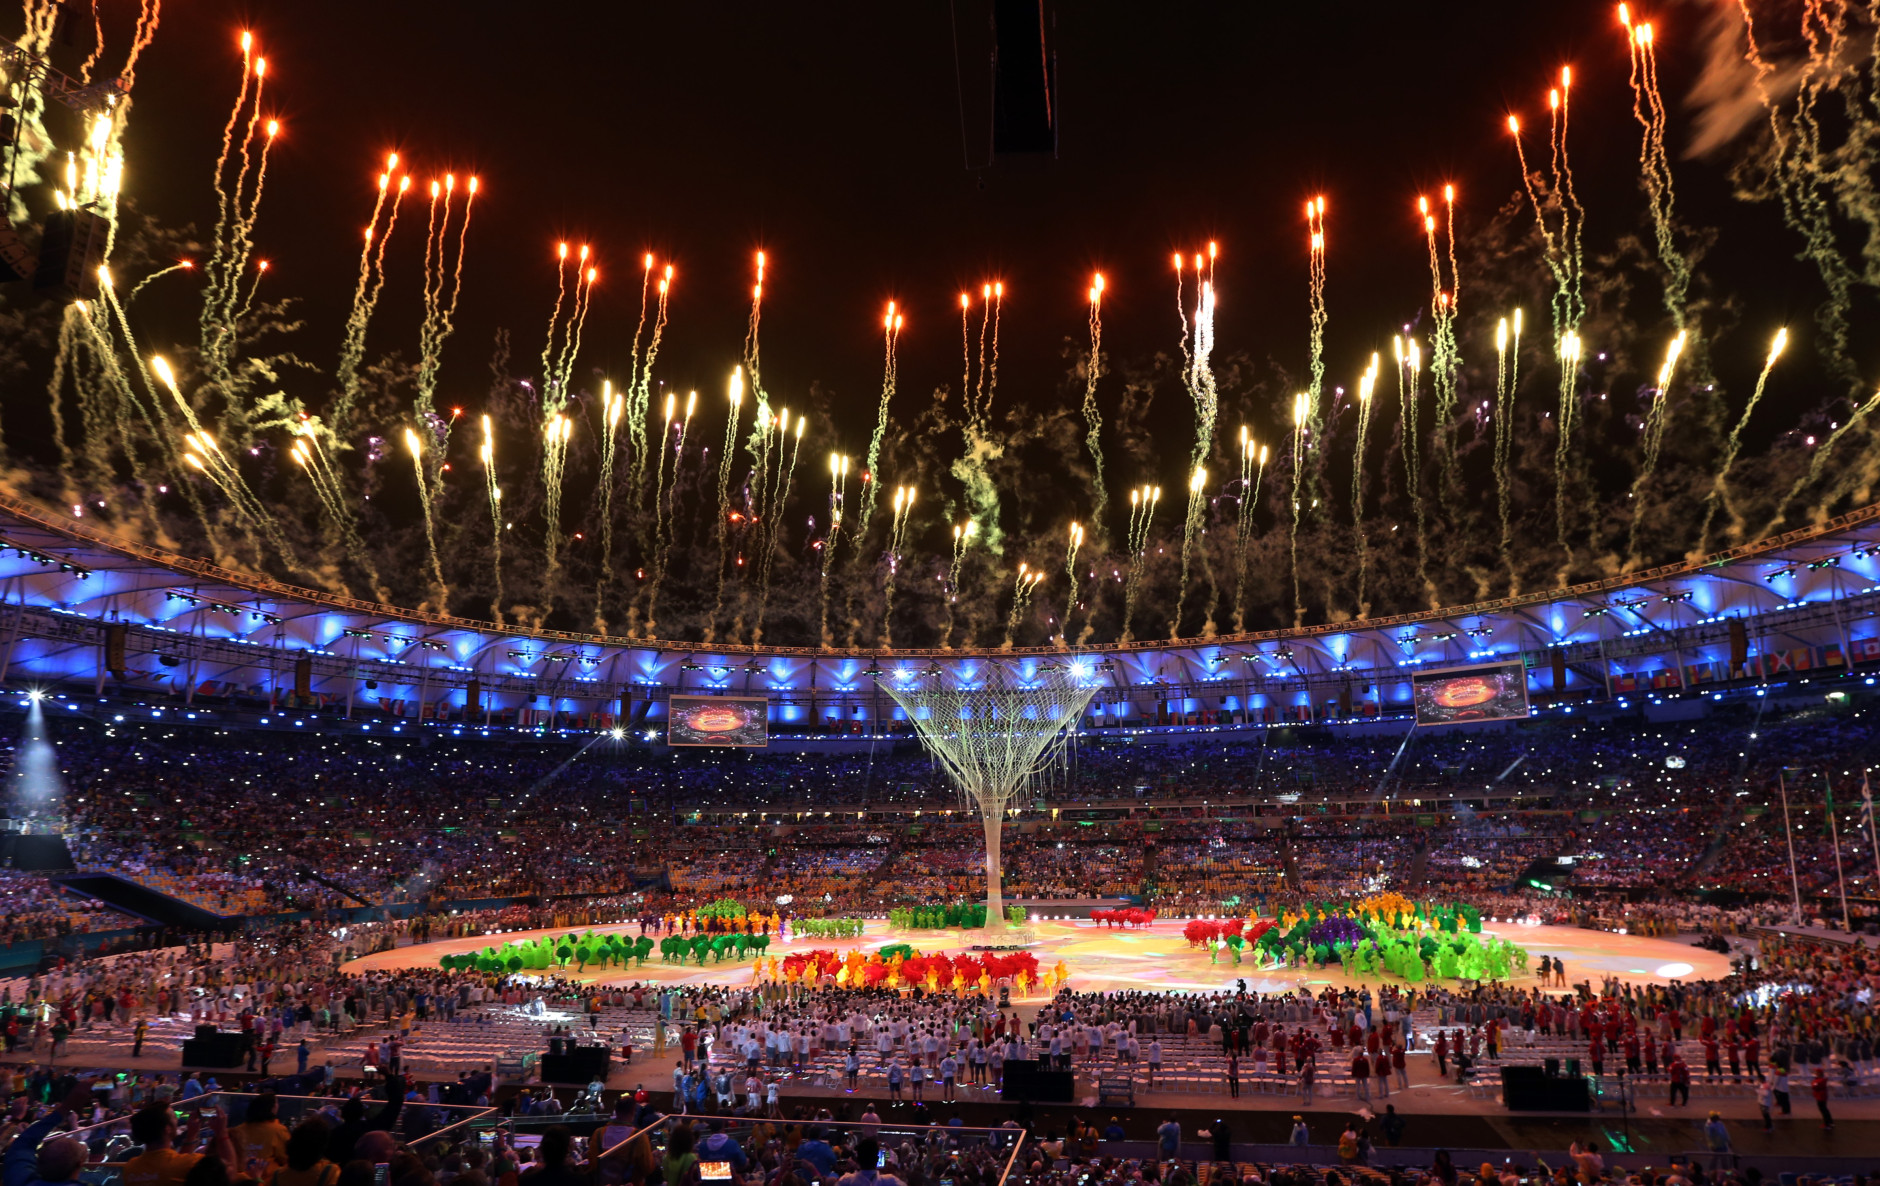 Fireworks goes off after the Olympic flame was extinguished during the closing ceremony in the Maracana stadium at the 2016 Summer Olympics in Rio de Janeiro, Brazil, Sunday, Aug. 21, 2016. (AP Photo/Natacha Pisarenko)